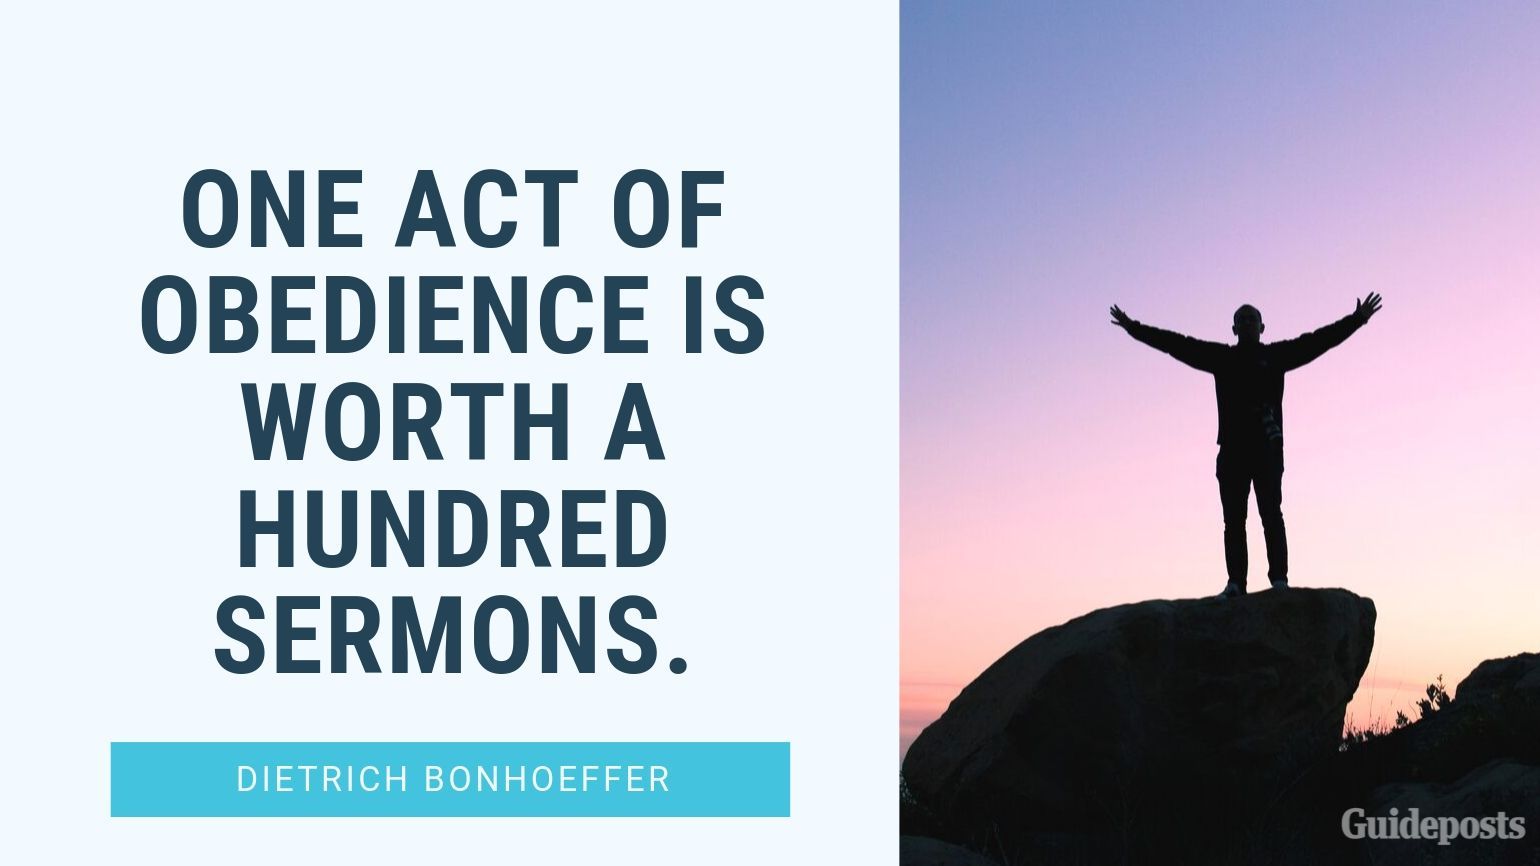 7 Inspiring Quotes from Dietrich Bonhoeffer German Pastor "One act of obedience is worth a hundred sermons." Inspiration Inspirational Stories of Faith